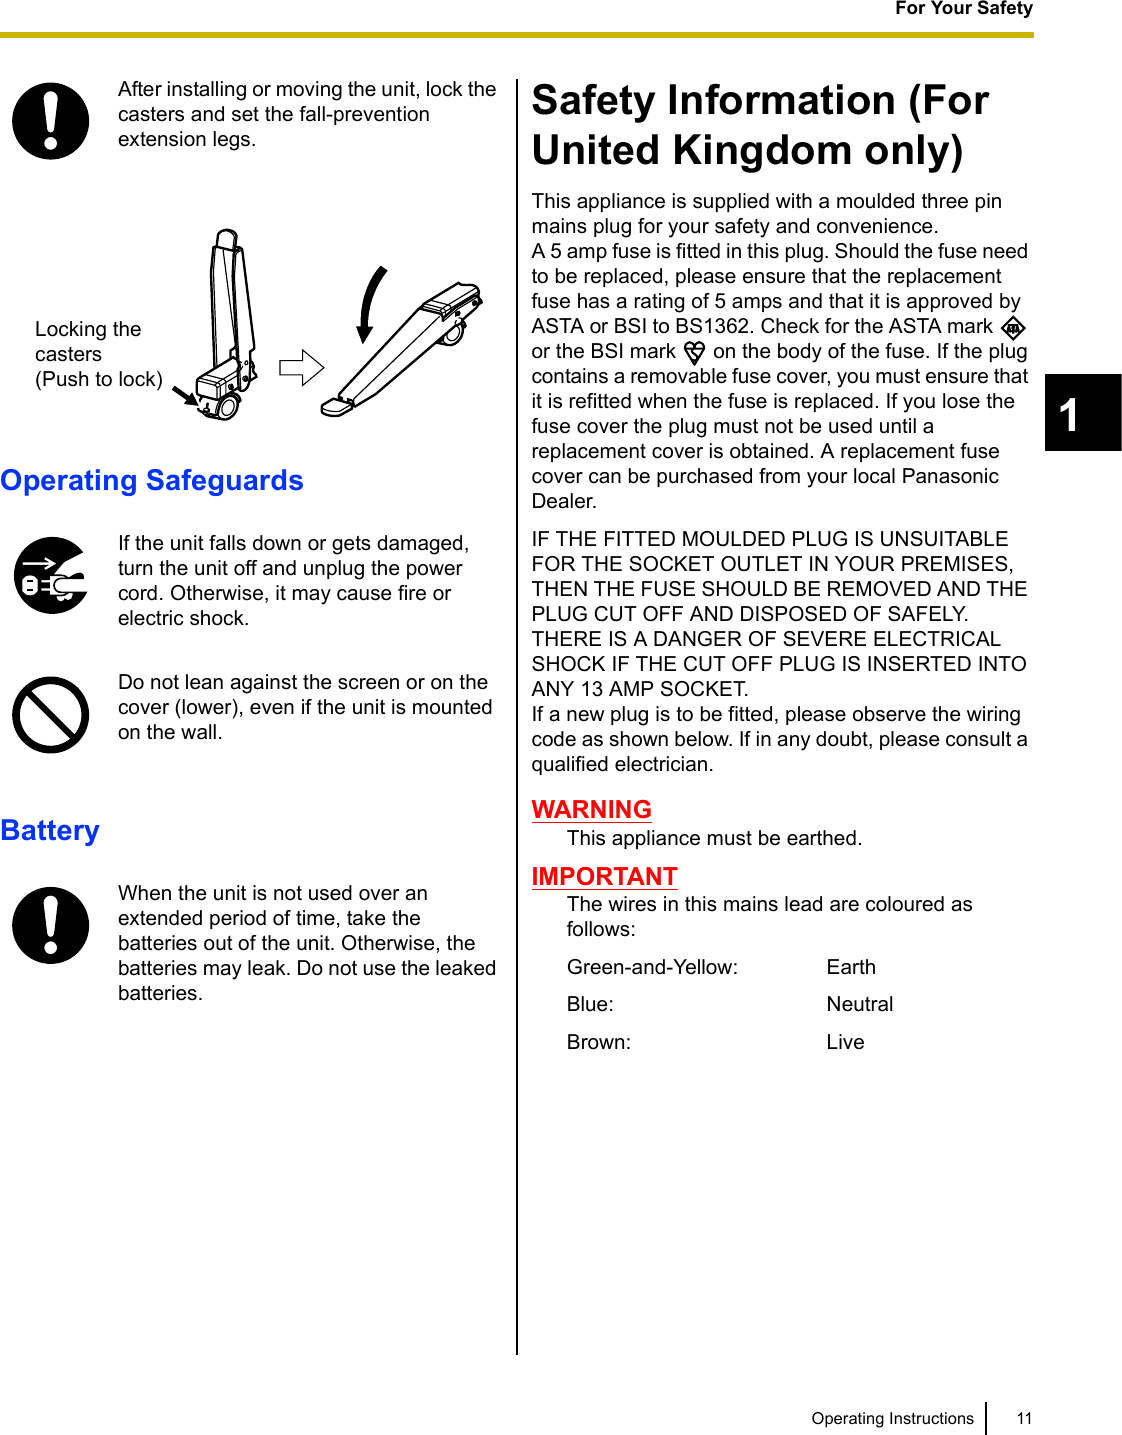 11Operating InstructionsFor Your Safety1Operating SafeguardsBatterySafety Information (For United Kingdom only)This appliance is supplied with a moulded three pin mains plug for your safety and convenience.A 5 amp fuse is fitted in this plug. Should the fuse need to be replaced, please ensure that the replacement fuse has a rating of 5 amps and that it is approved by ASTA or BSI to BS1362. Check for the ASTA mark   or the BSI mark   on the body of the fuse. If the plug contains a removable fuse cover, you must ensure that it is refitted when the fuse is replaced. If you lose the fuse cover the plug must not be used until a replacement cover is obtained. A replacement fuse cover can be purchased from your local Panasonic Dealer.IF THE FITTED MOULDED PLUG IS UNSUITABLE FOR THE SOCKET OUTLET IN YOUR PREMISES, THEN THE FUSE SHOULD BE REMOVED AND THE PLUG CUT OFF AND DISPOSED OF SAFELY.THERE IS A DANGER OF SEVERE ELECTRICAL SHOCK IF THE CUT OFF PLUG IS INSERTED INTO ANY 13 AMP SOCKET.If a new plug is to be fitted, please observe the wiring code as shown below. If in any doubt, please consult a qualified electrician.WARNINGThis appliance must be earthed.IMPORTANTThe wires in this mains lead are coloured as follows:Green-and-Yellow: EarthBlue: NeutralBrown: LiveAfter installing or moving the unit, lock the casters and set the fall-prevention extension legs.If the unit falls down or gets damaged, turn the unit off and unplug the power cord. Otherwise, it may cause fire or electric shock.Do not lean against the screen or on the cover (lower), even if the unit is mounted on the wall.When the unit is not used over an extended period of time, take the batteries out of the unit. Otherwise, the batteries may leak. Do not use the leaked batteries.Locking the casters(Push to lock)